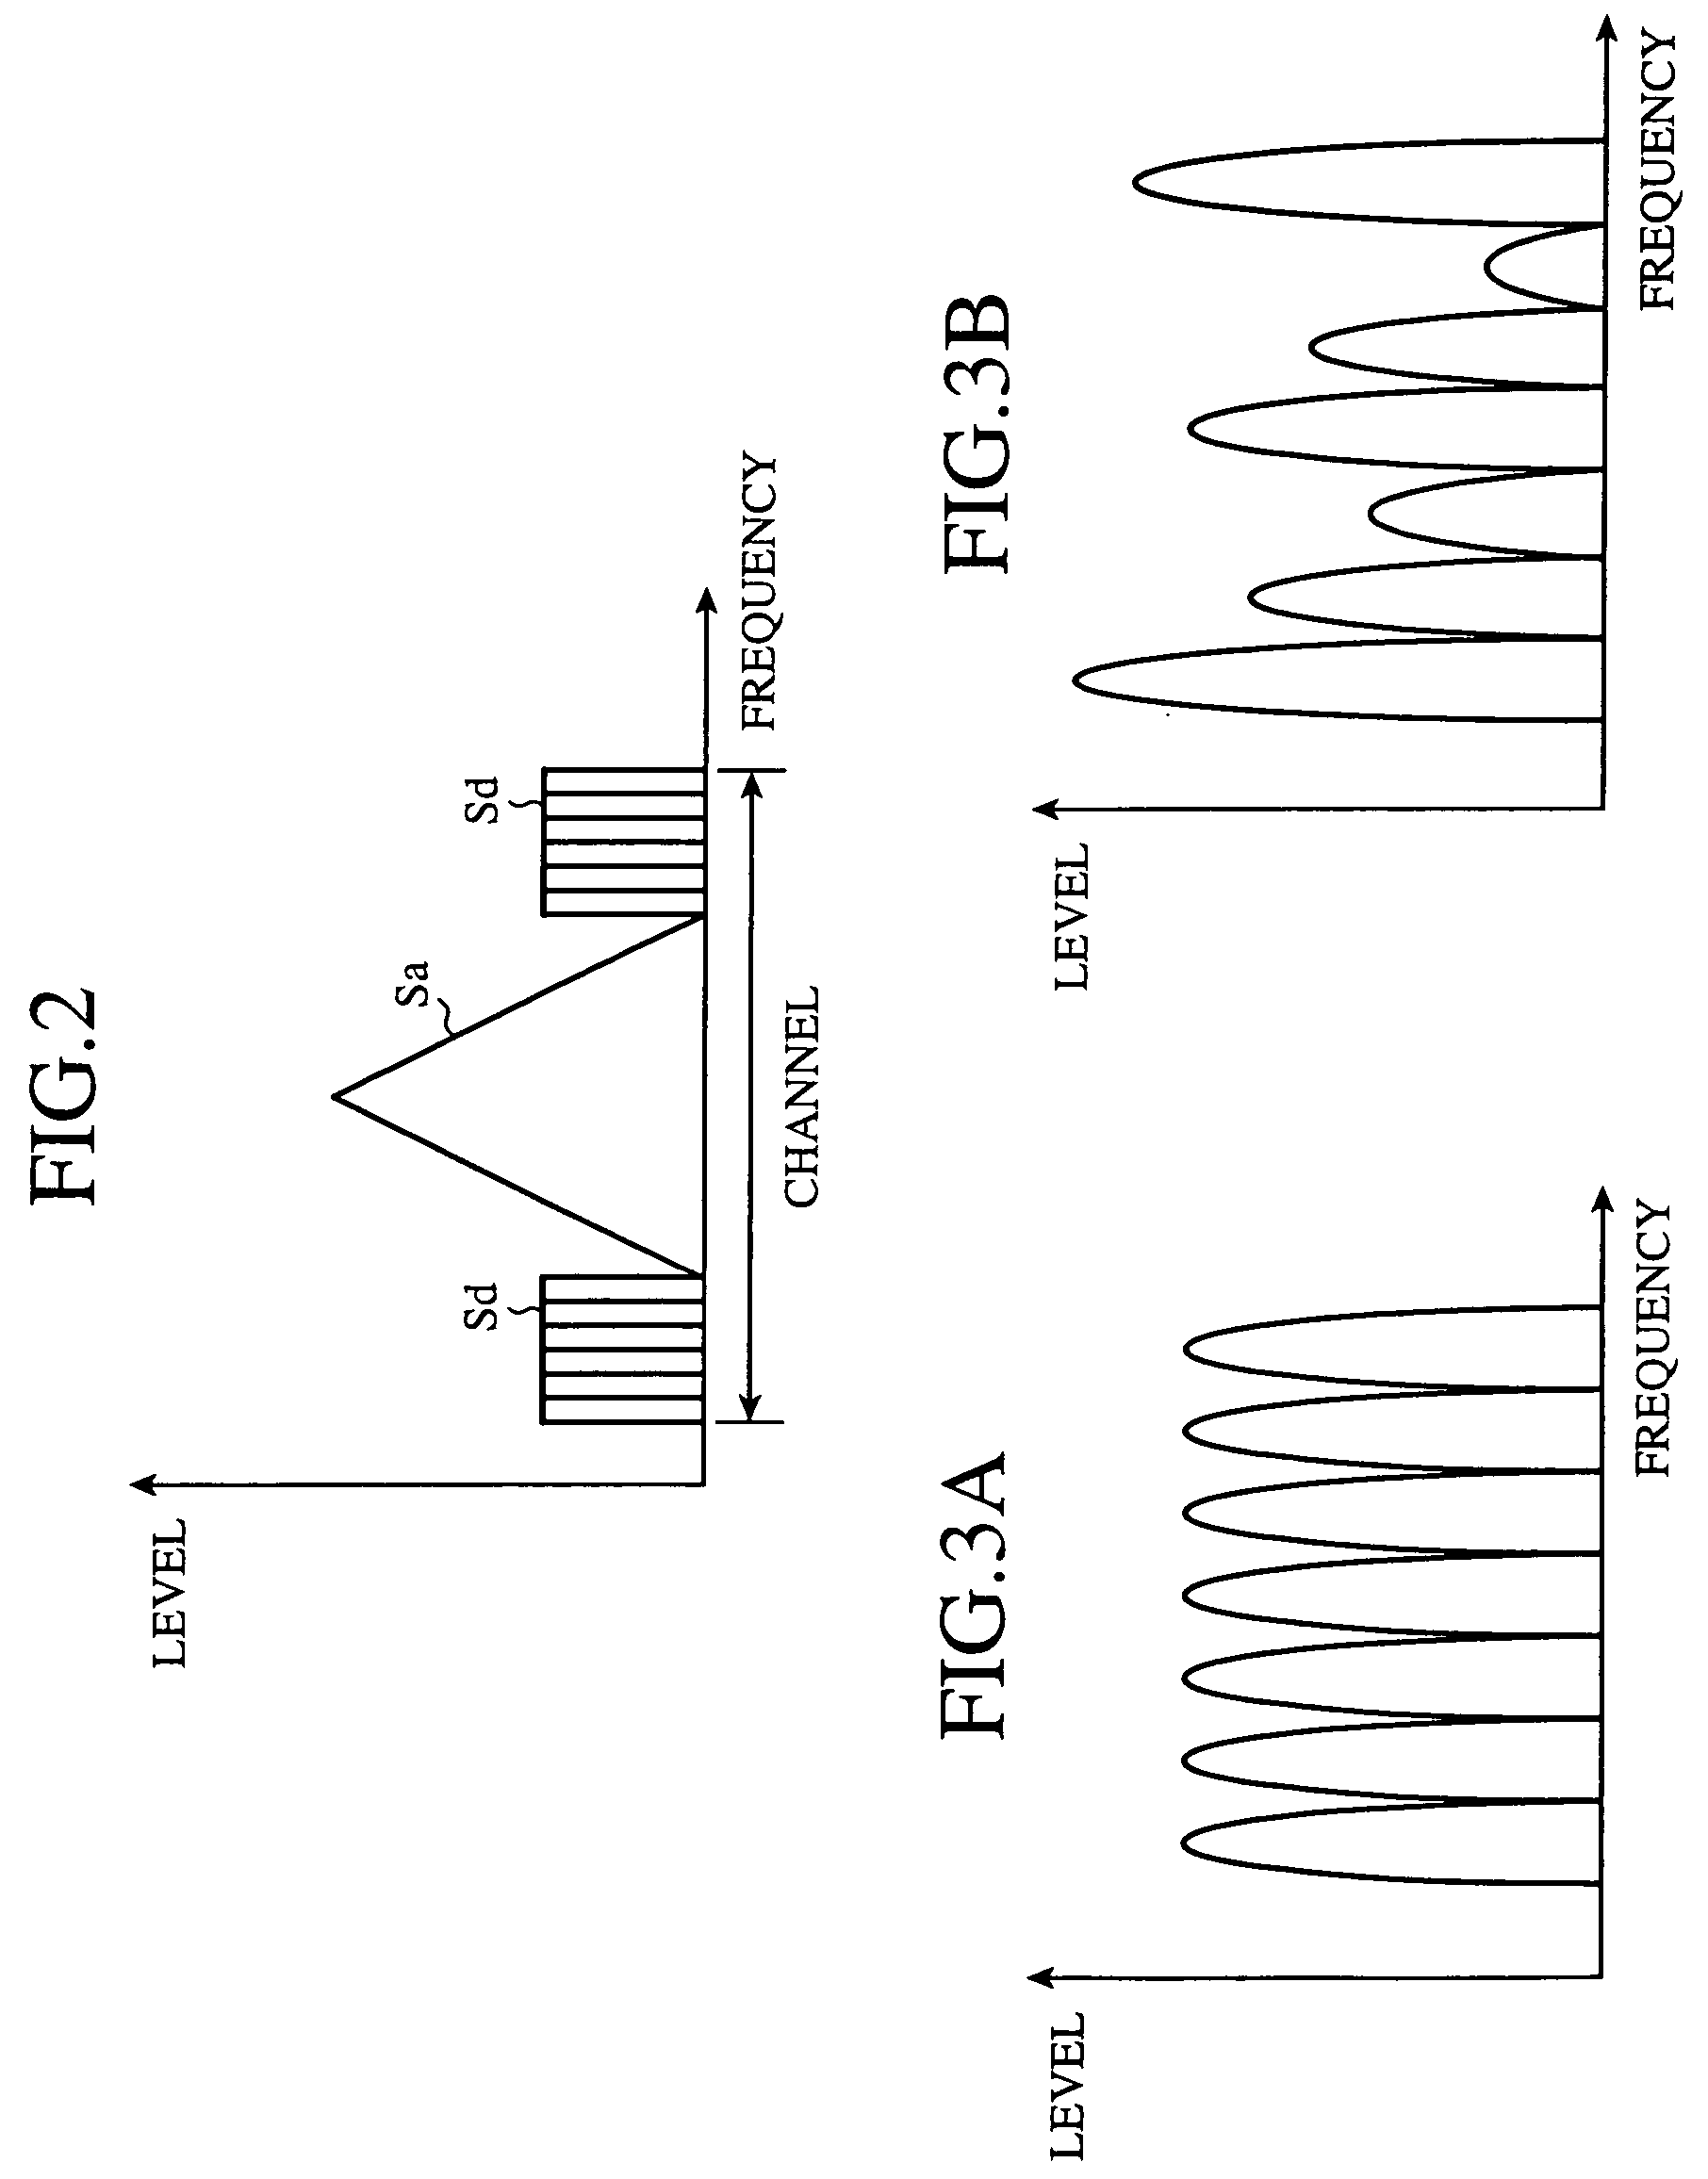 Receiver capable of switching between digital and analog broadcasting signals